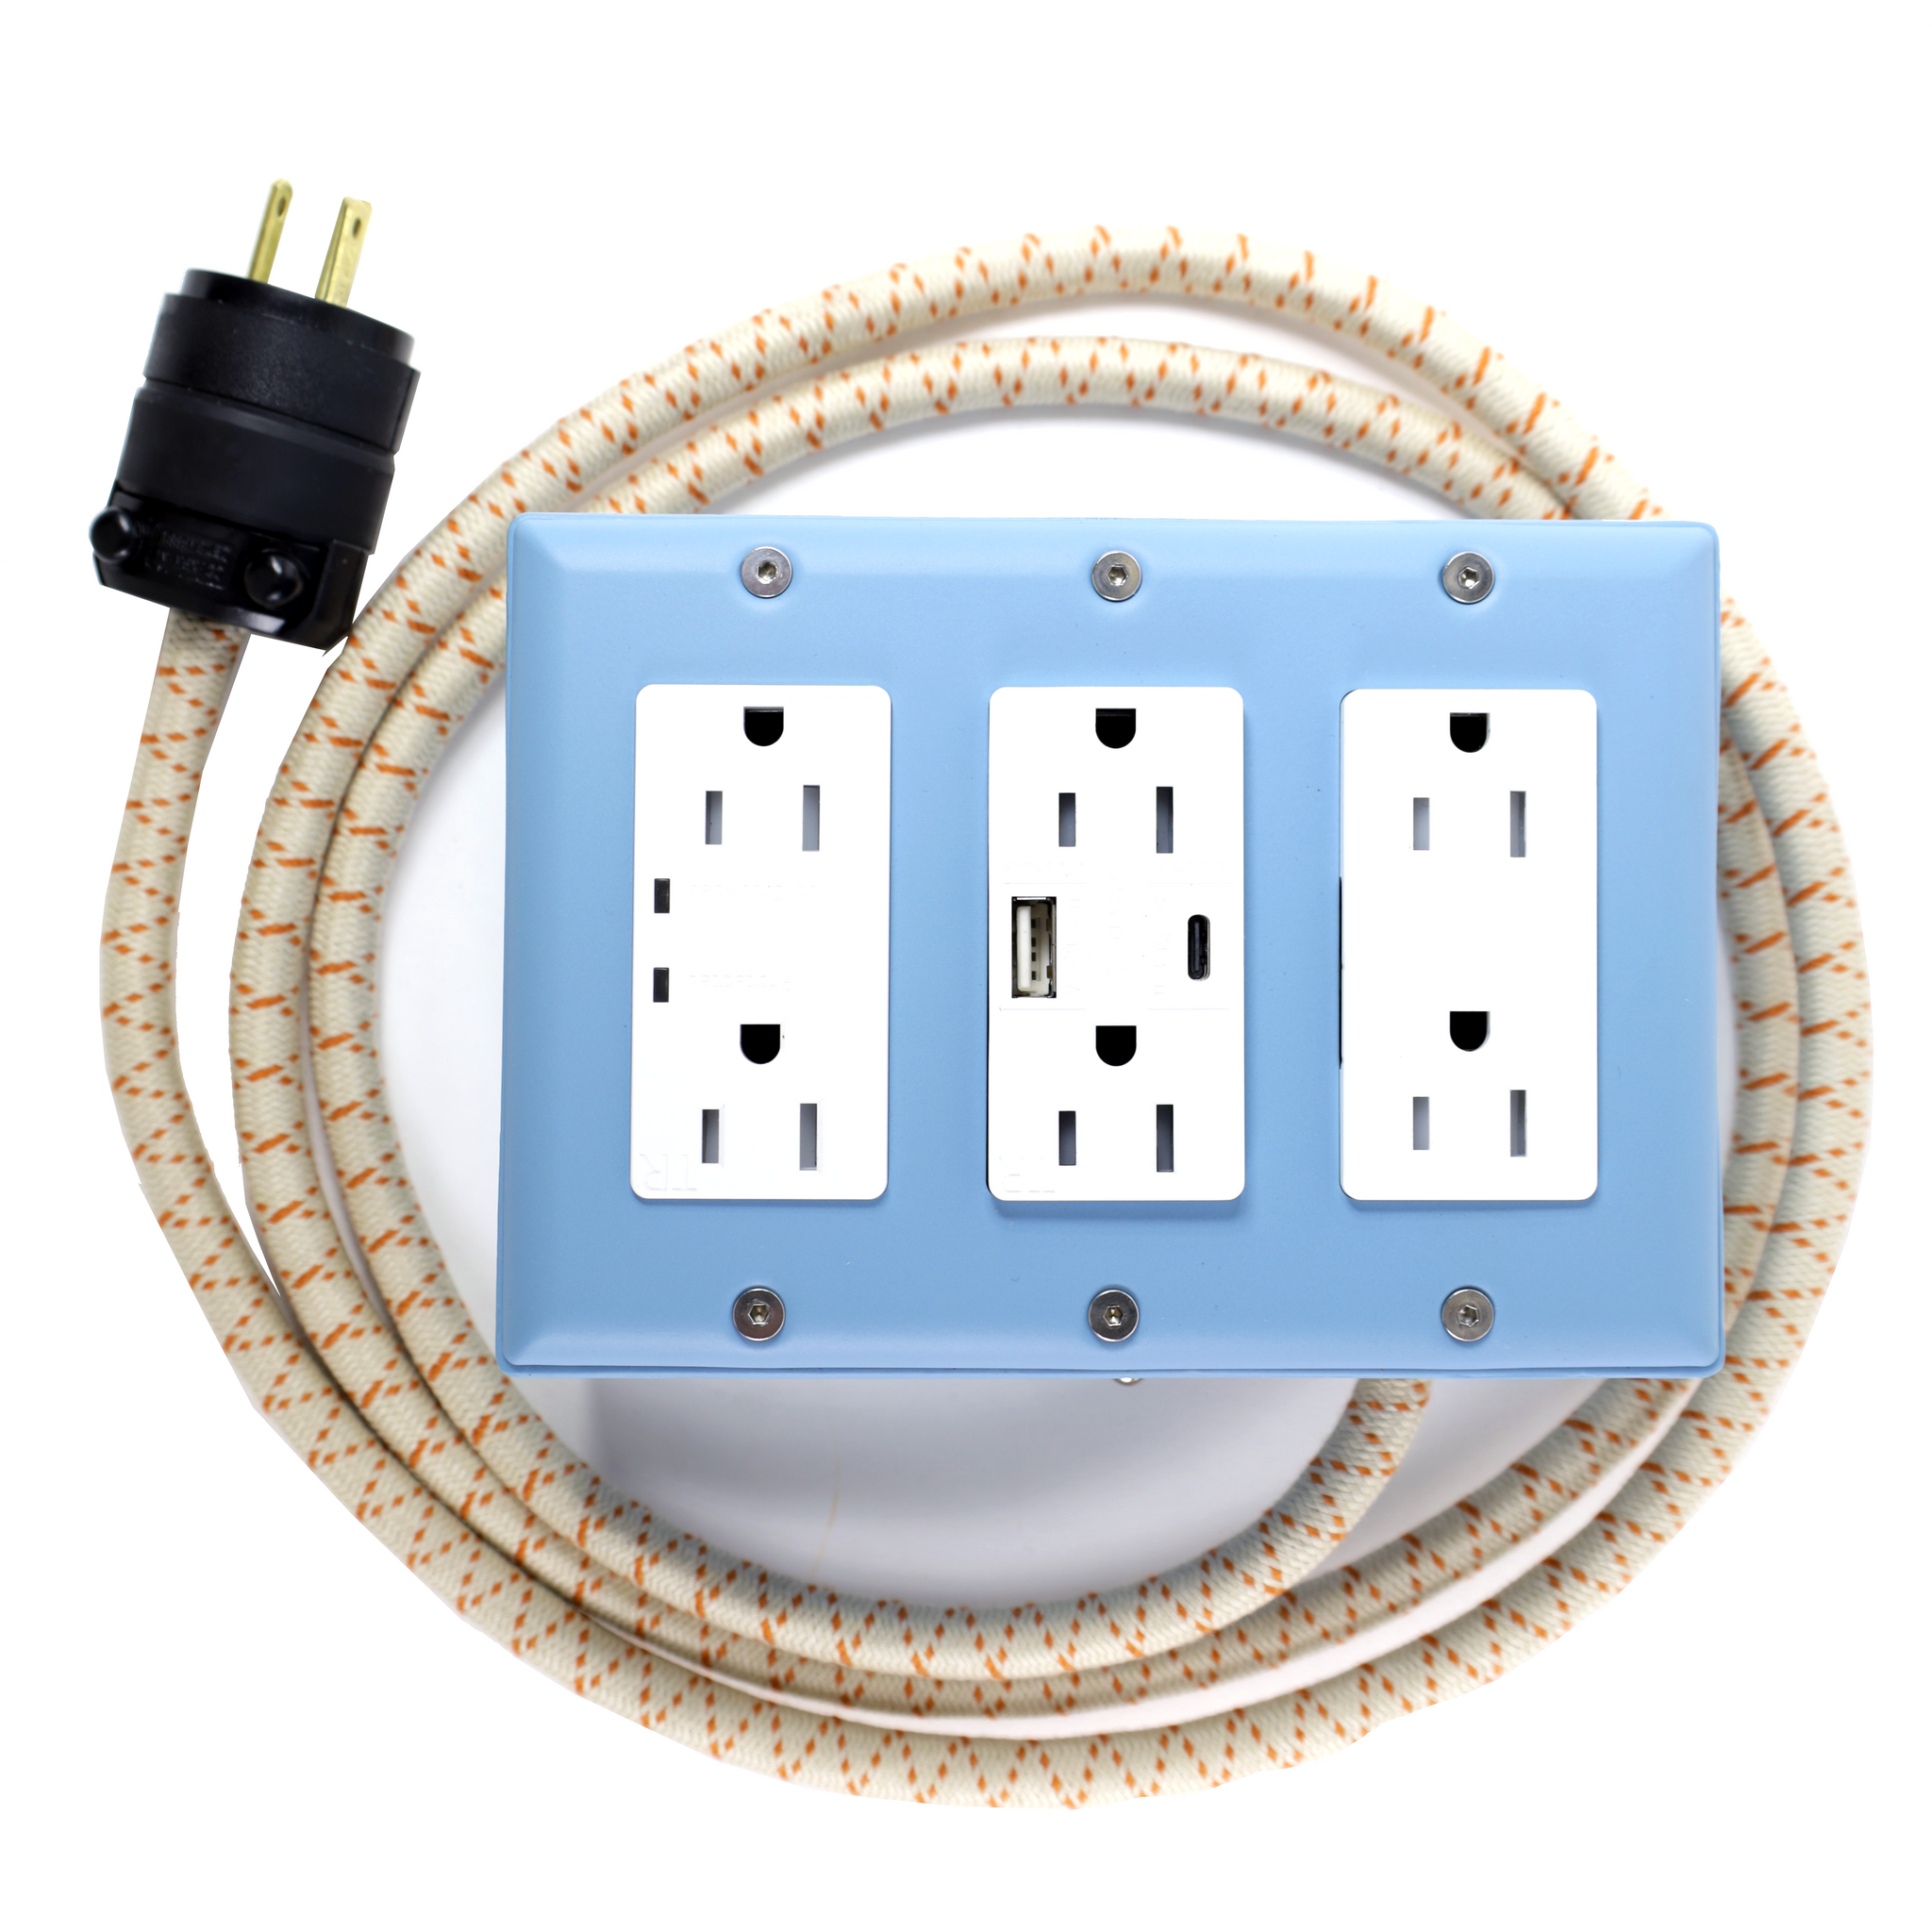 6 Types of Electrical Plugs and Their Uses